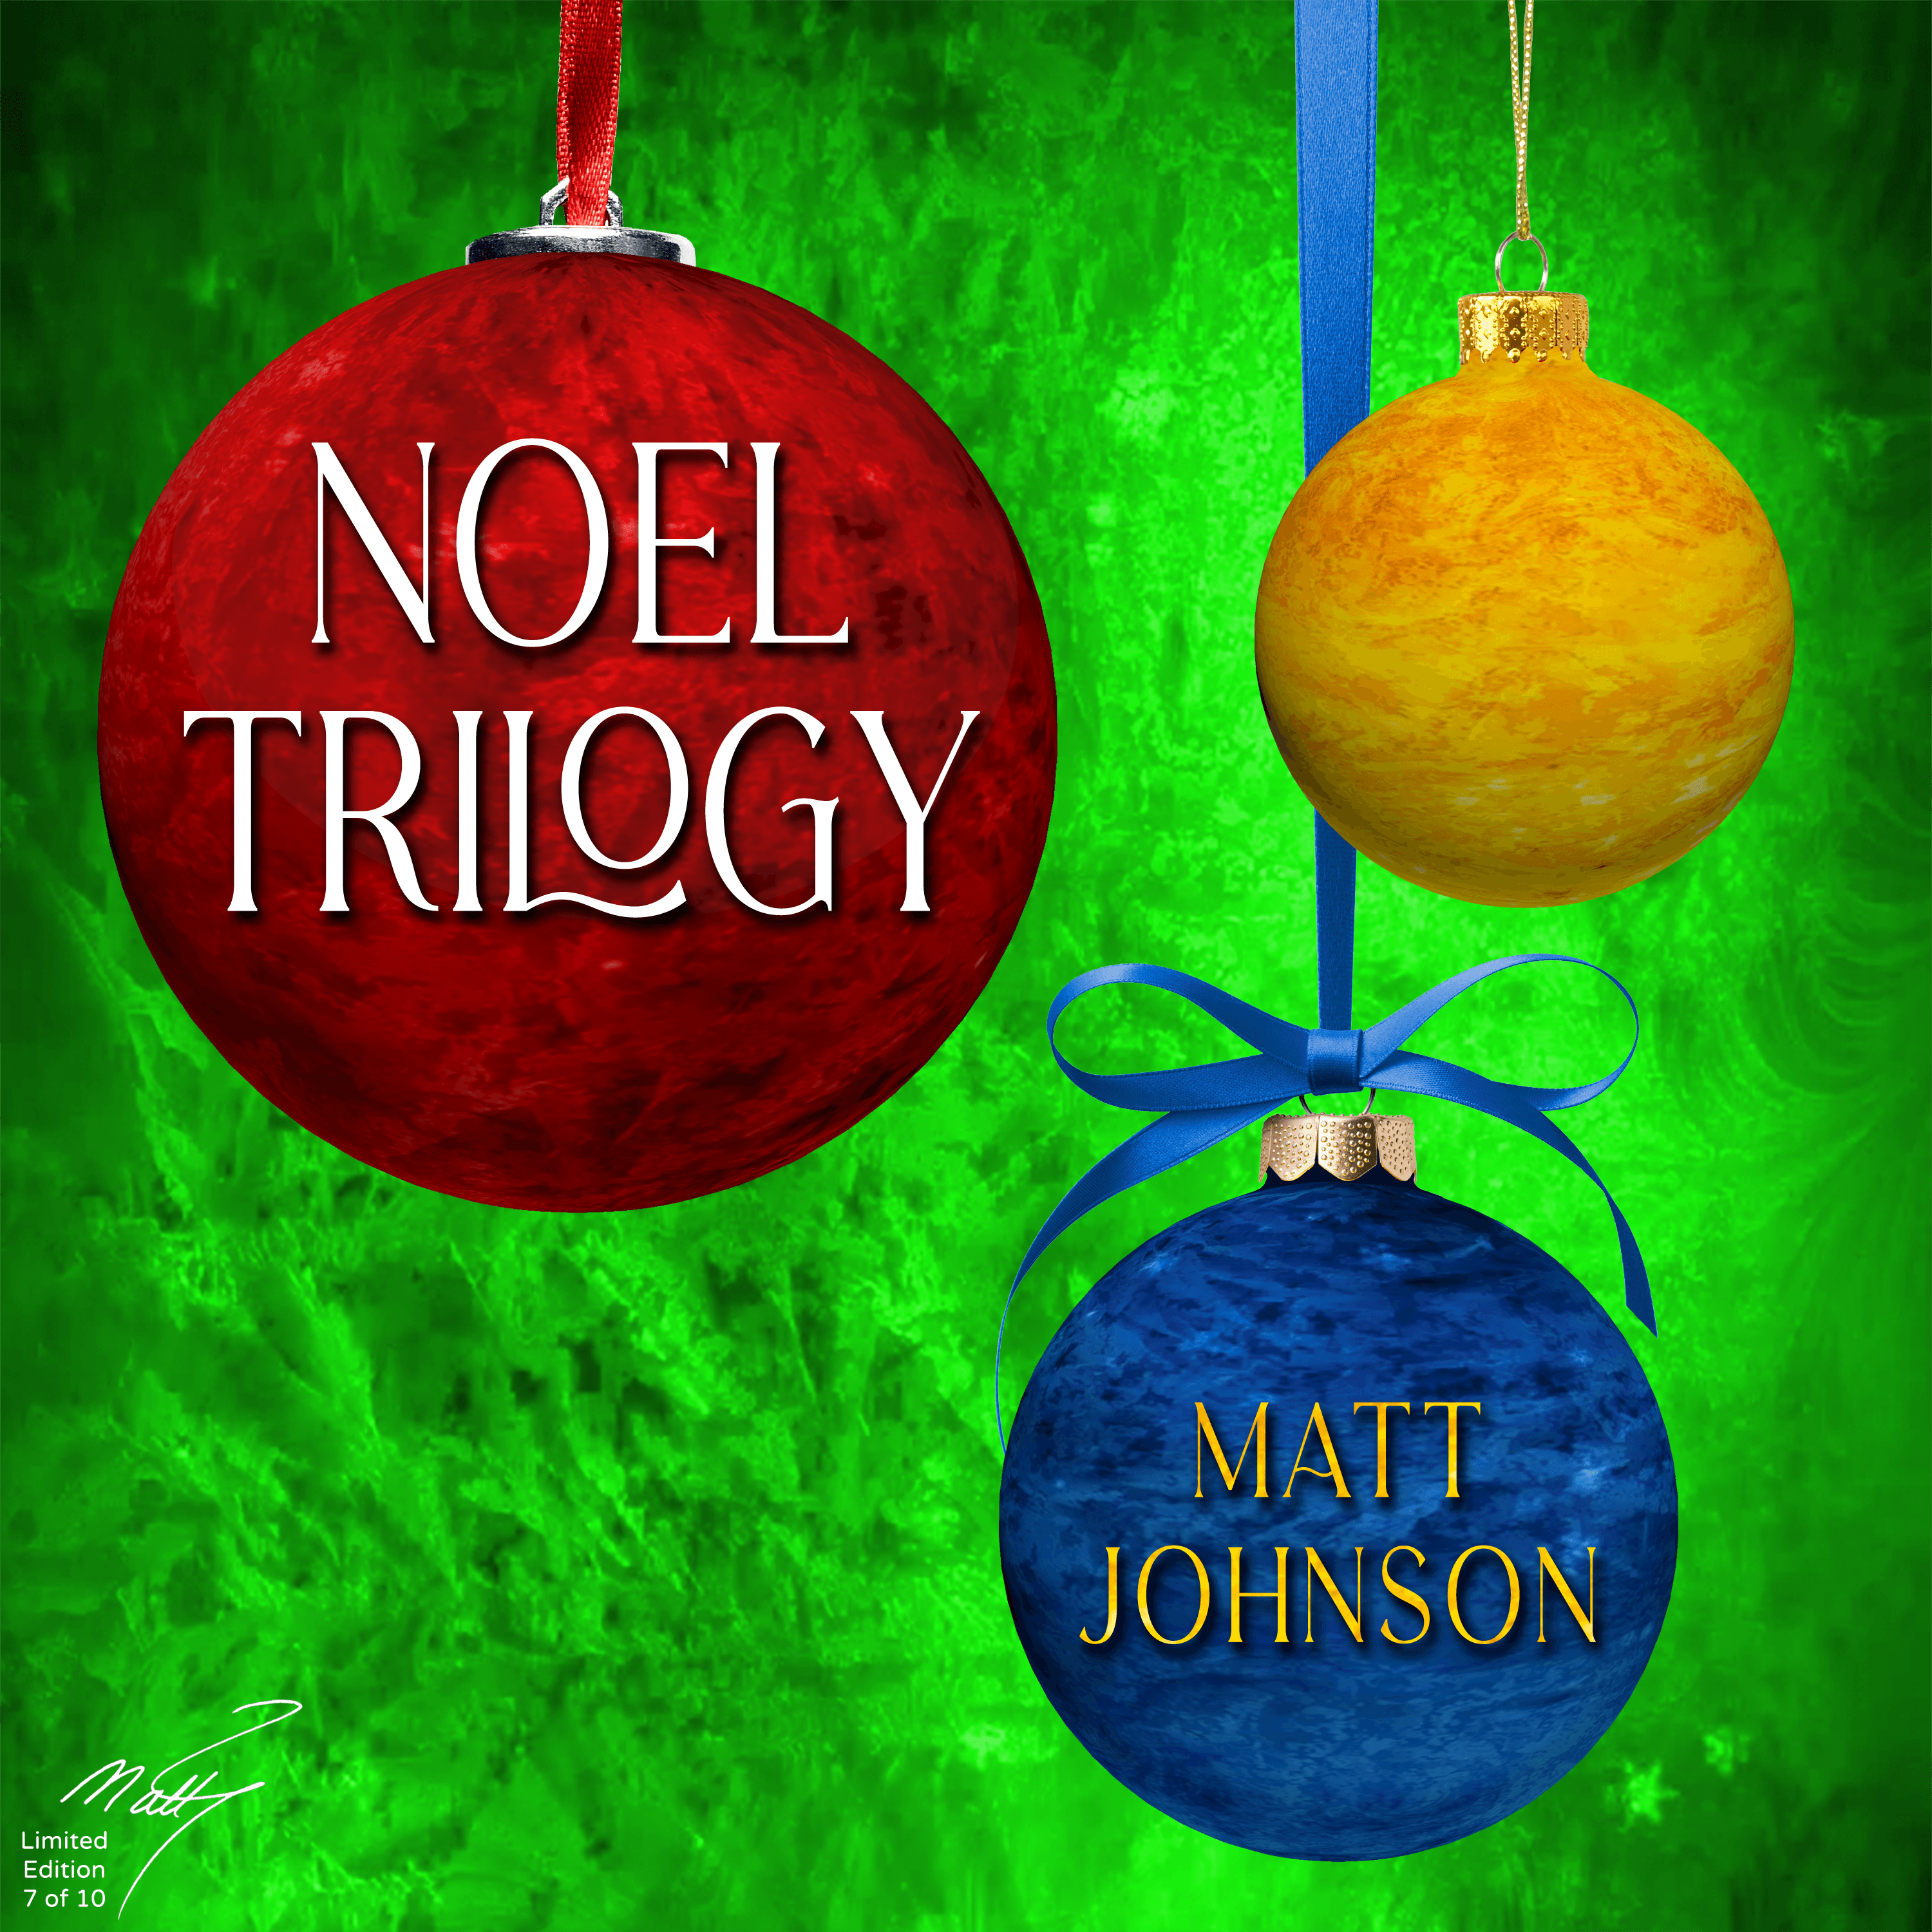 "Noel Trilogy" by Matt Johnson-Autographed Limited Edition (7 of 10)